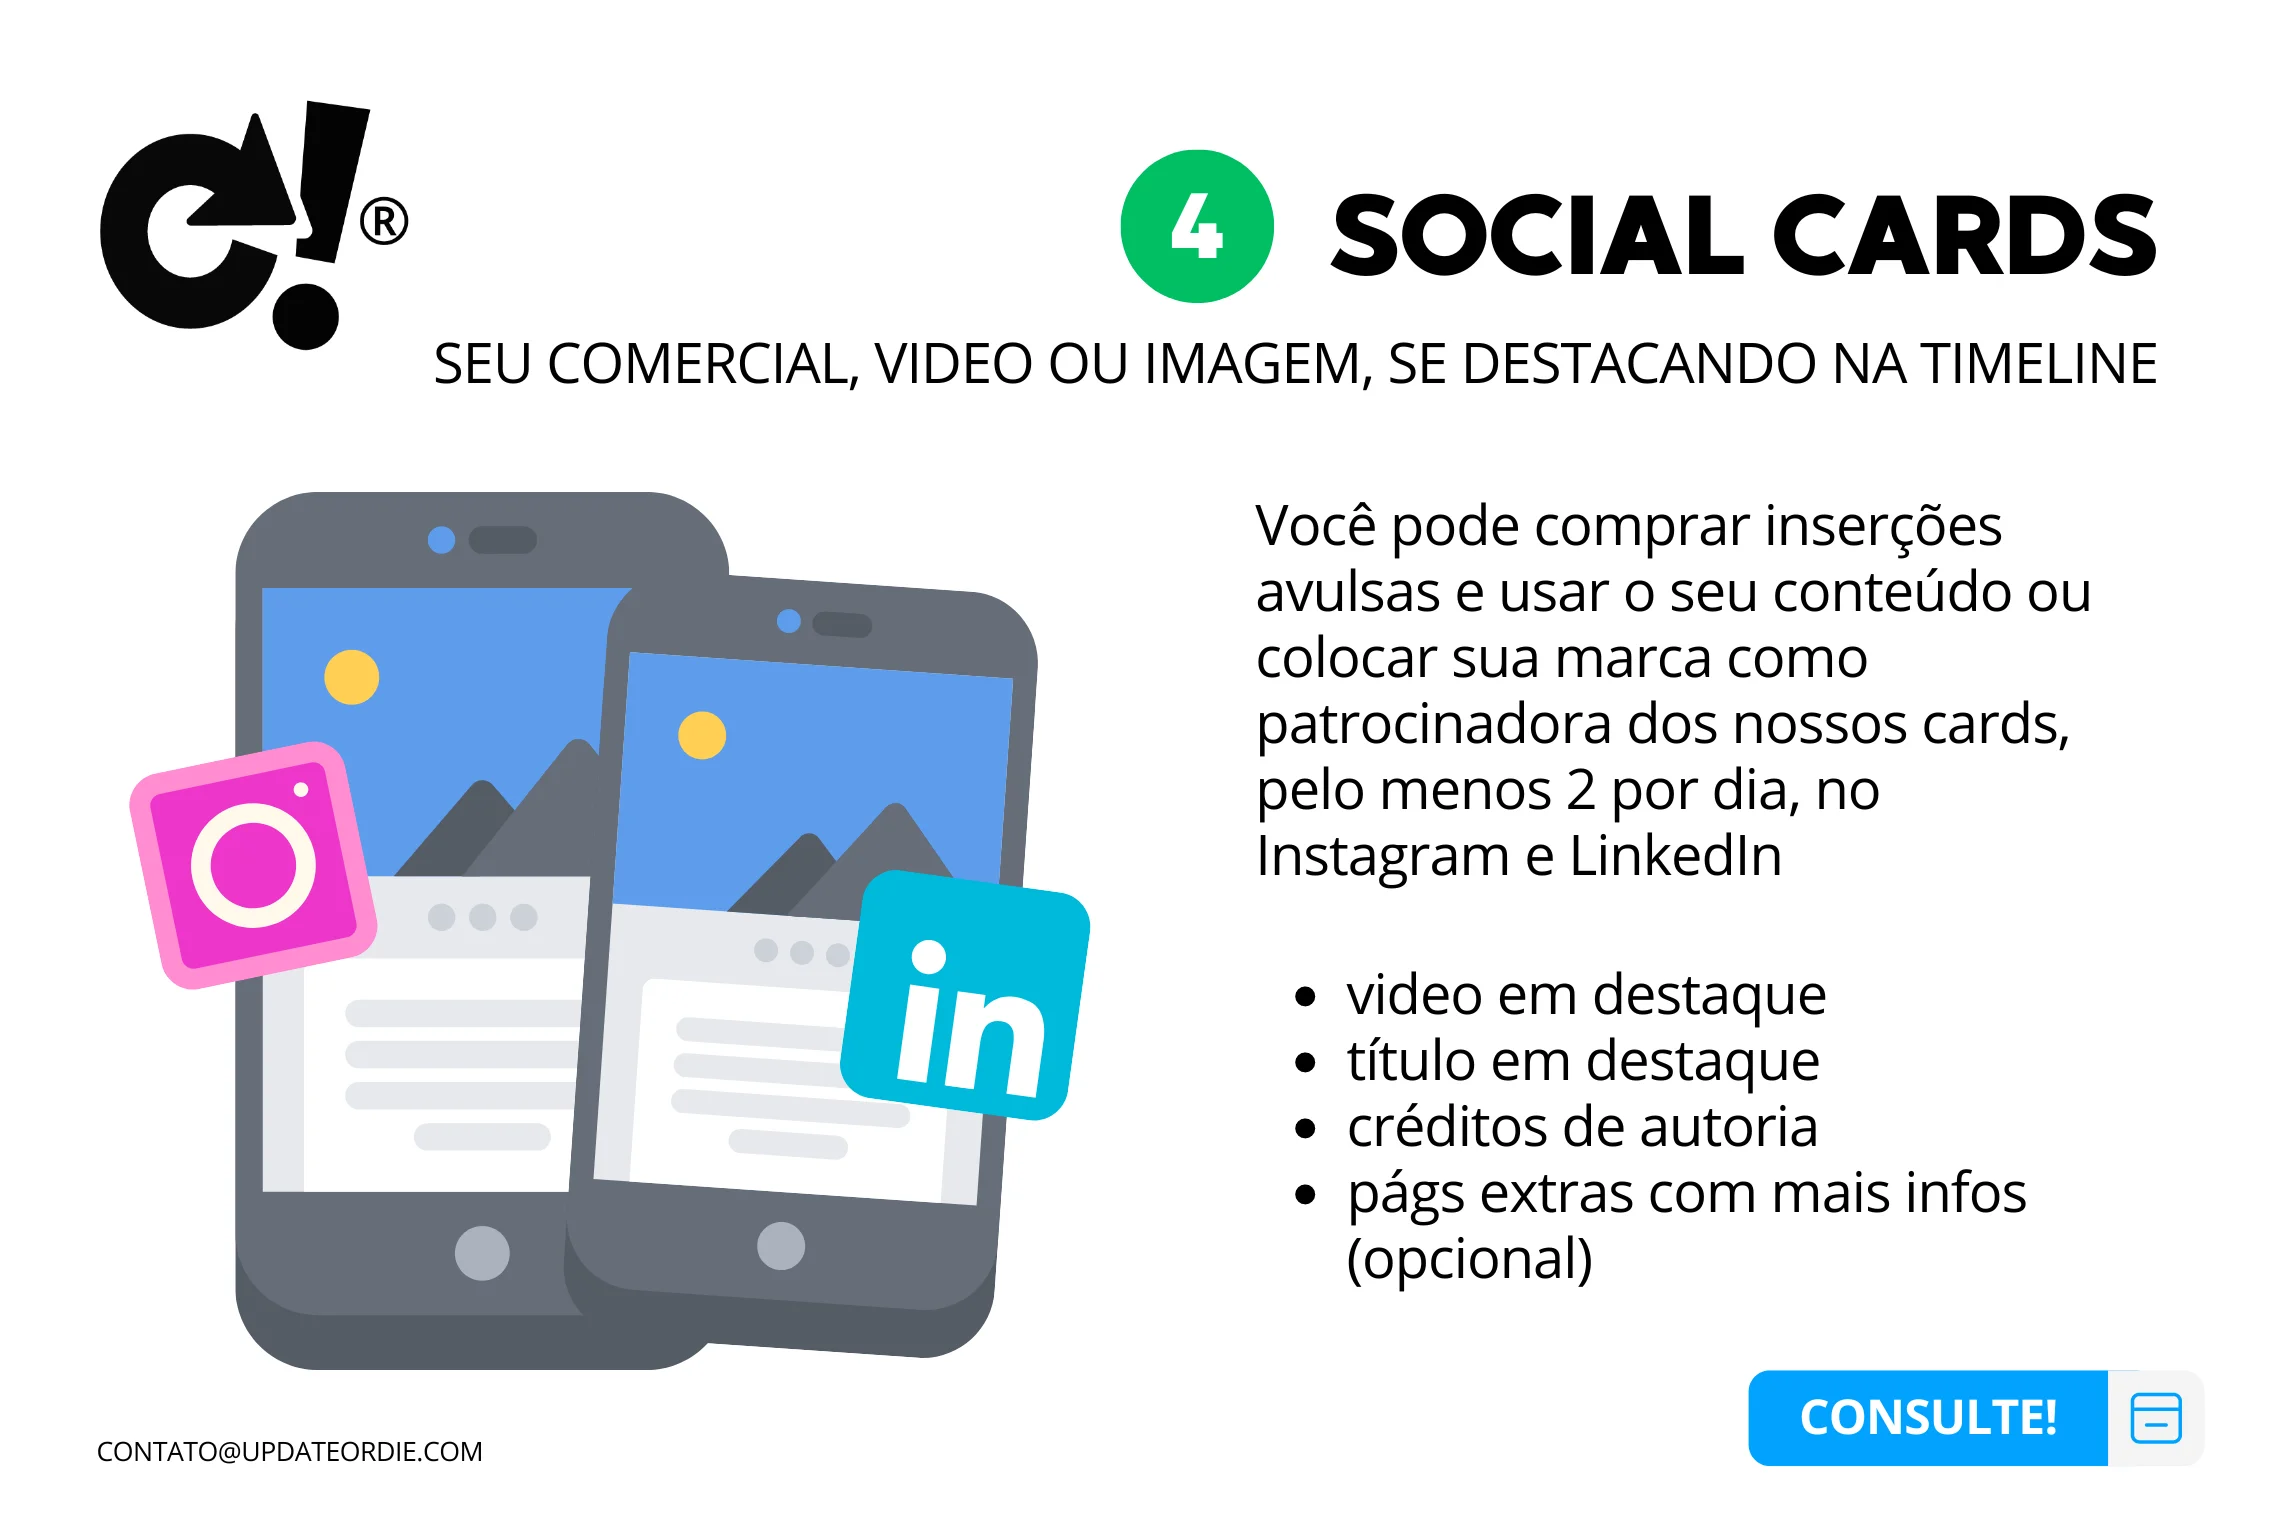 SEO optimized alt text: "Graphic explaining social cards for commercial, video, or image content with Instagram and LinkedIn icons on smartphones, highlighting advertising options available on social media platforms."